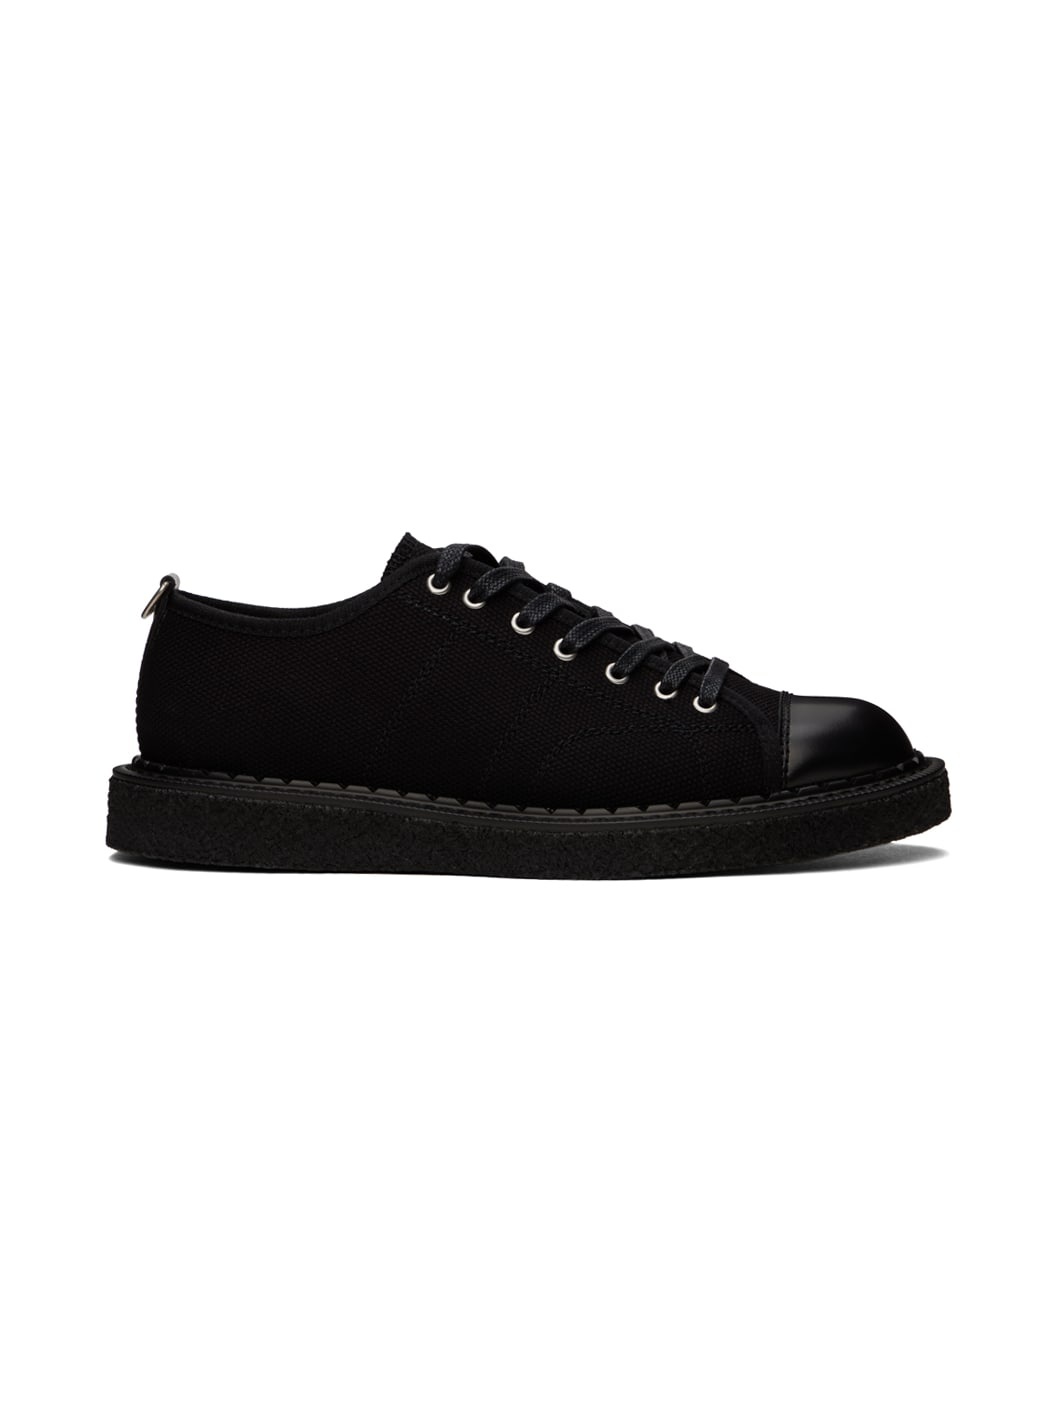 Black George Cox Edition Canvas Monkey Sneakers - 1